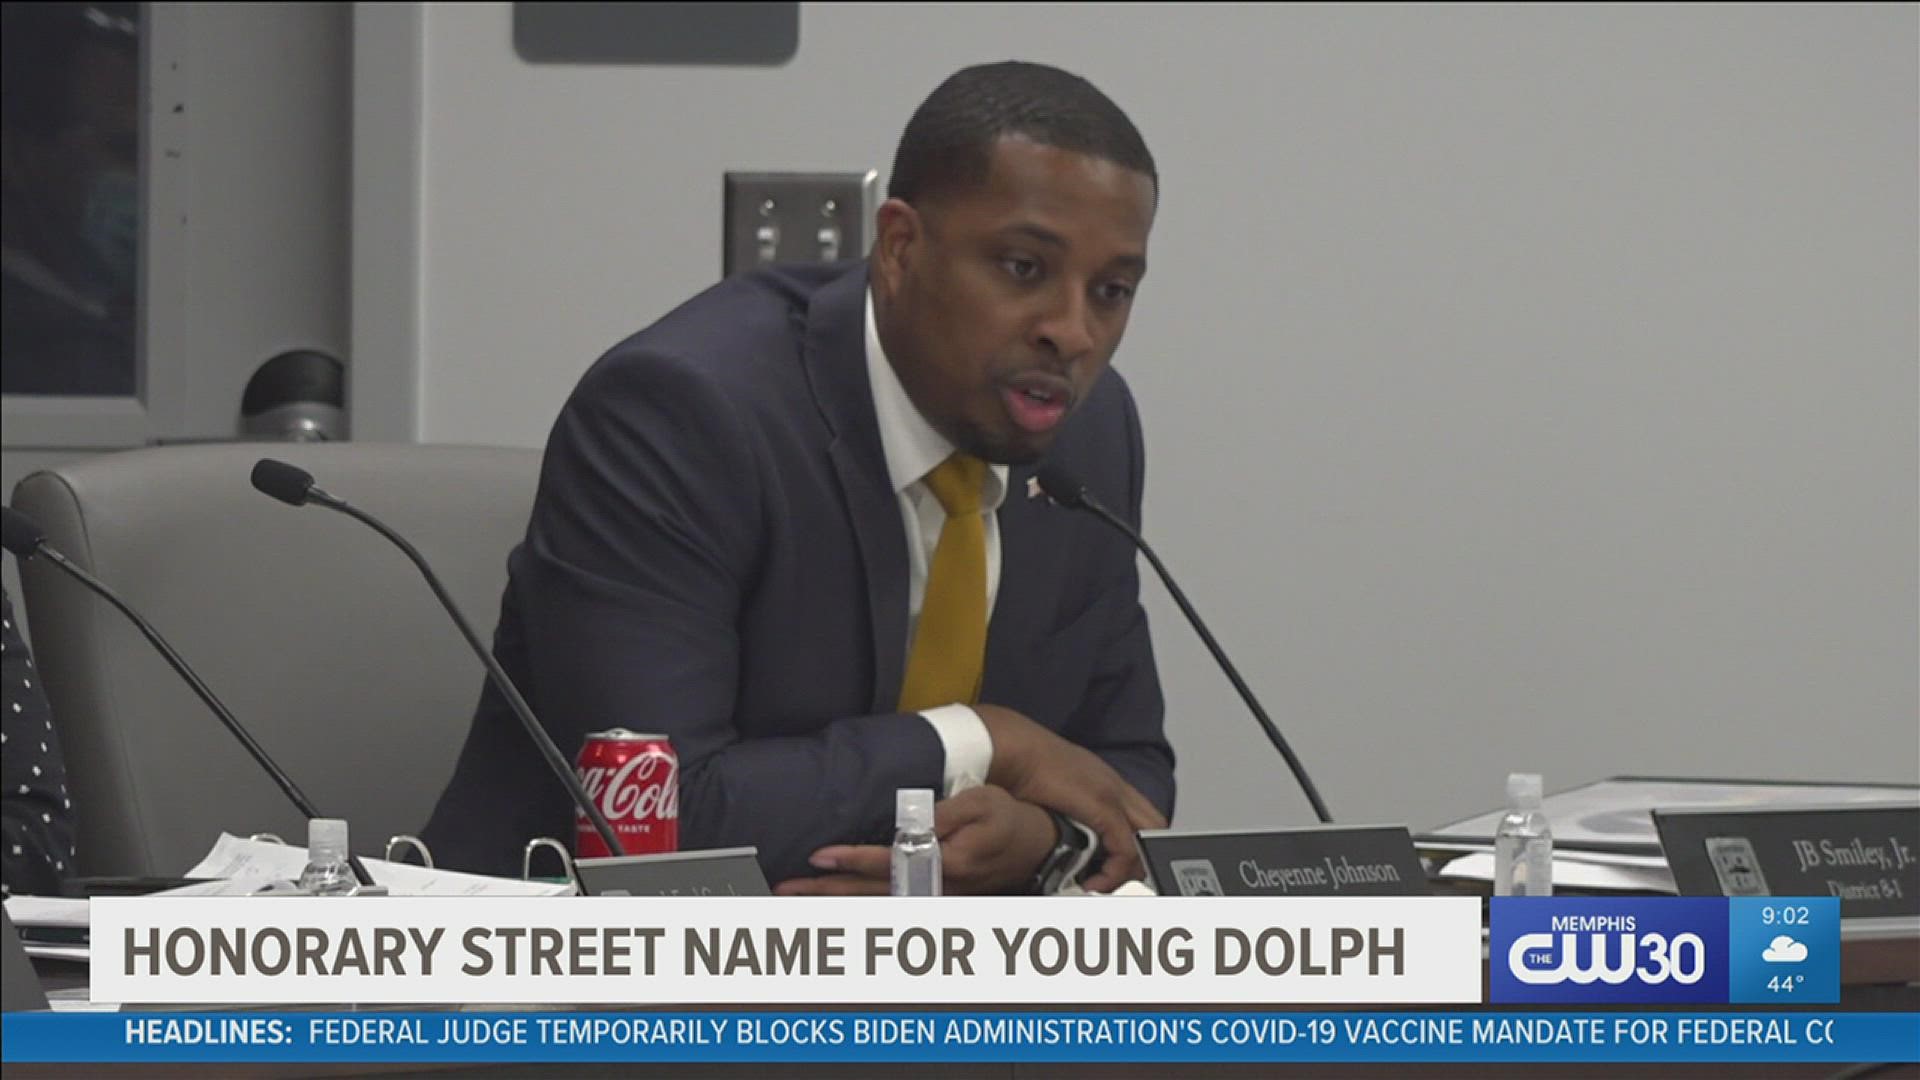 Councilman JB Smiley Jr. presented a street renaming in Young Dolph's honor to be located at Dunn Avenue and Airways Blvd in Castalia Heights.